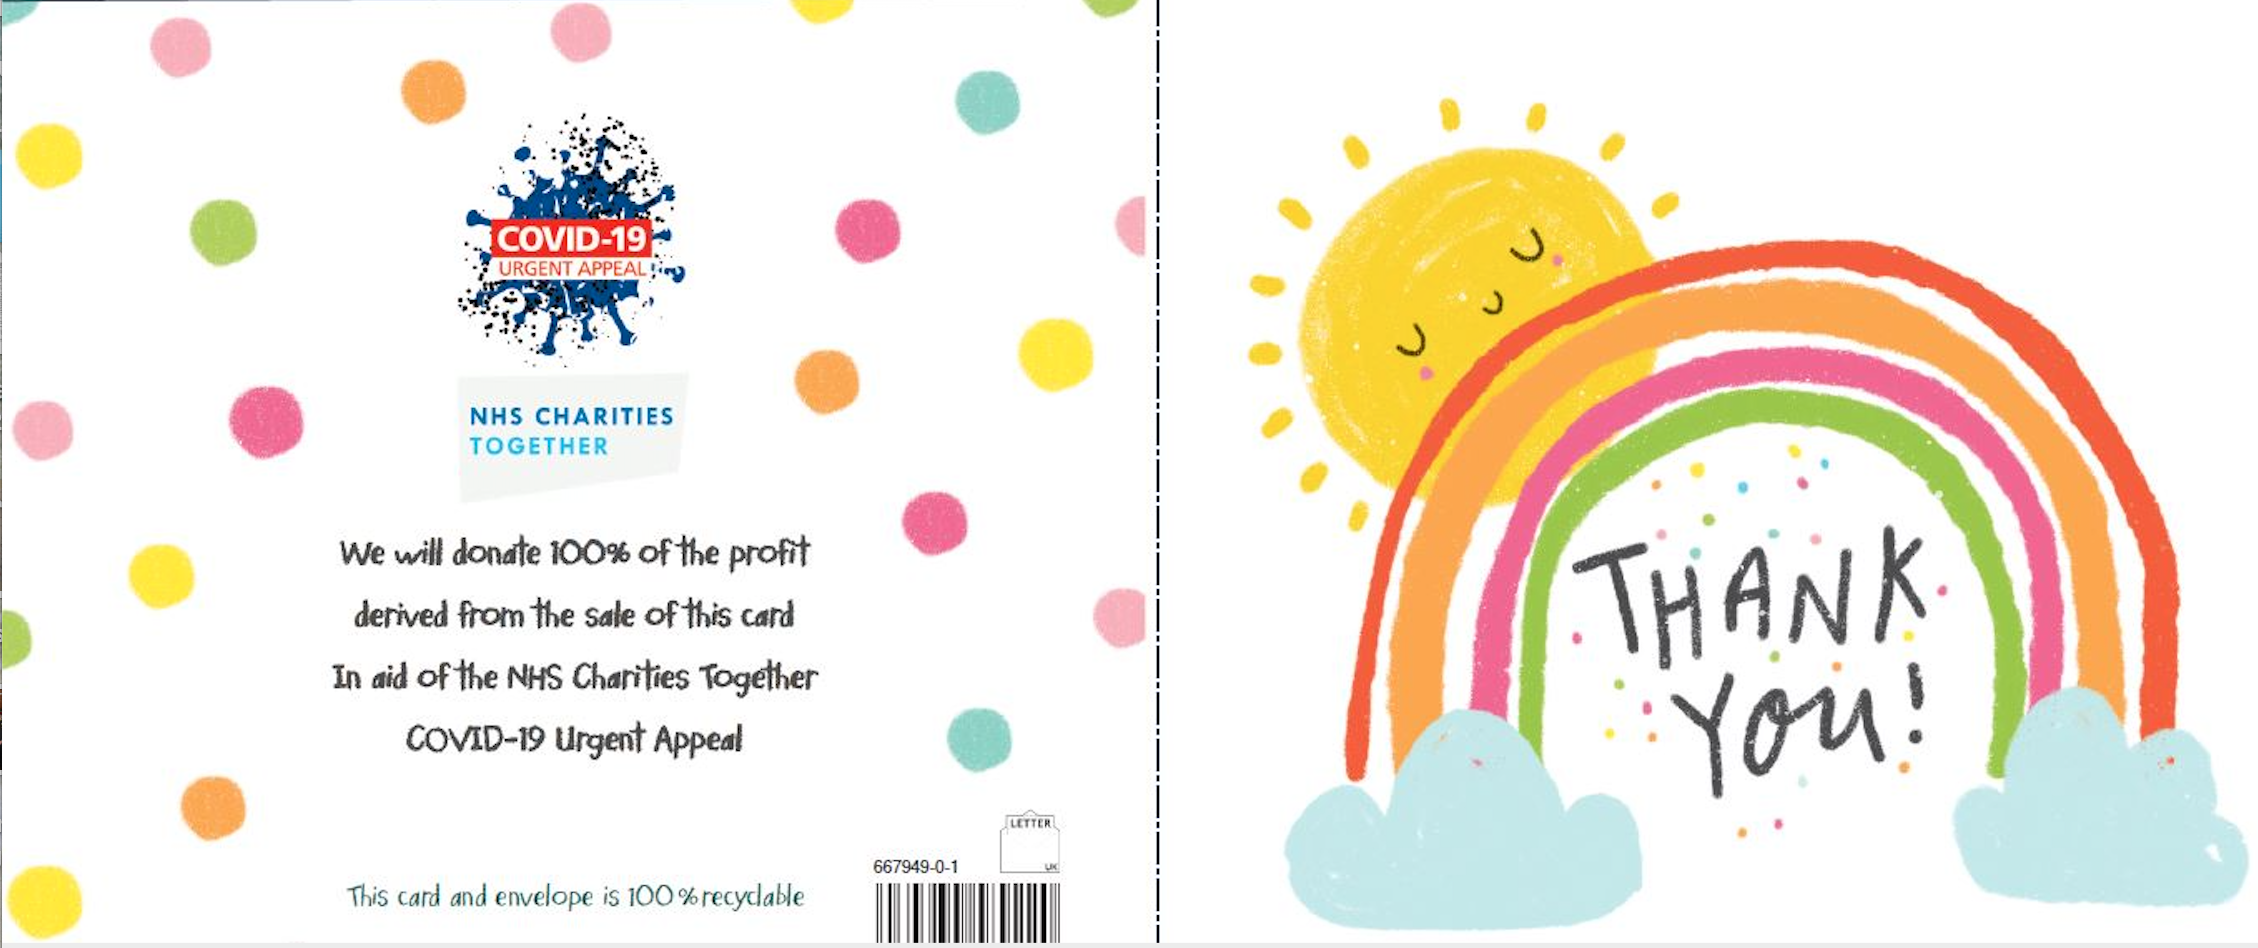 Above: The front and rear of the special charity card that UKG designed and Wrapid printed for free.